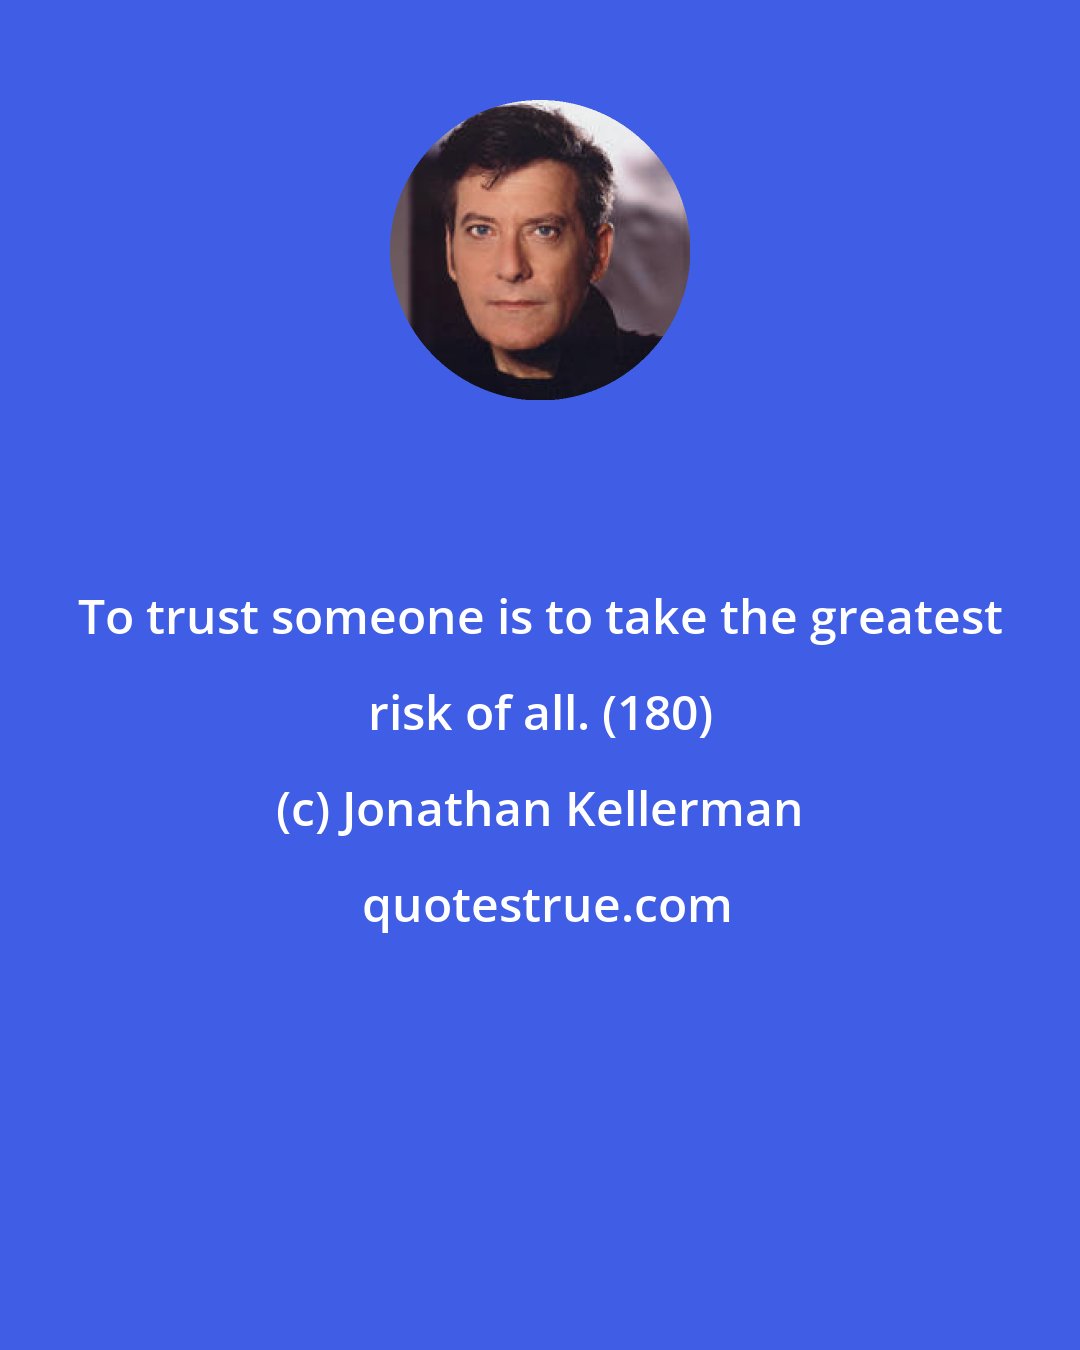 Jonathan Kellerman: To trust someone is to take the greatest risk of all. (180)